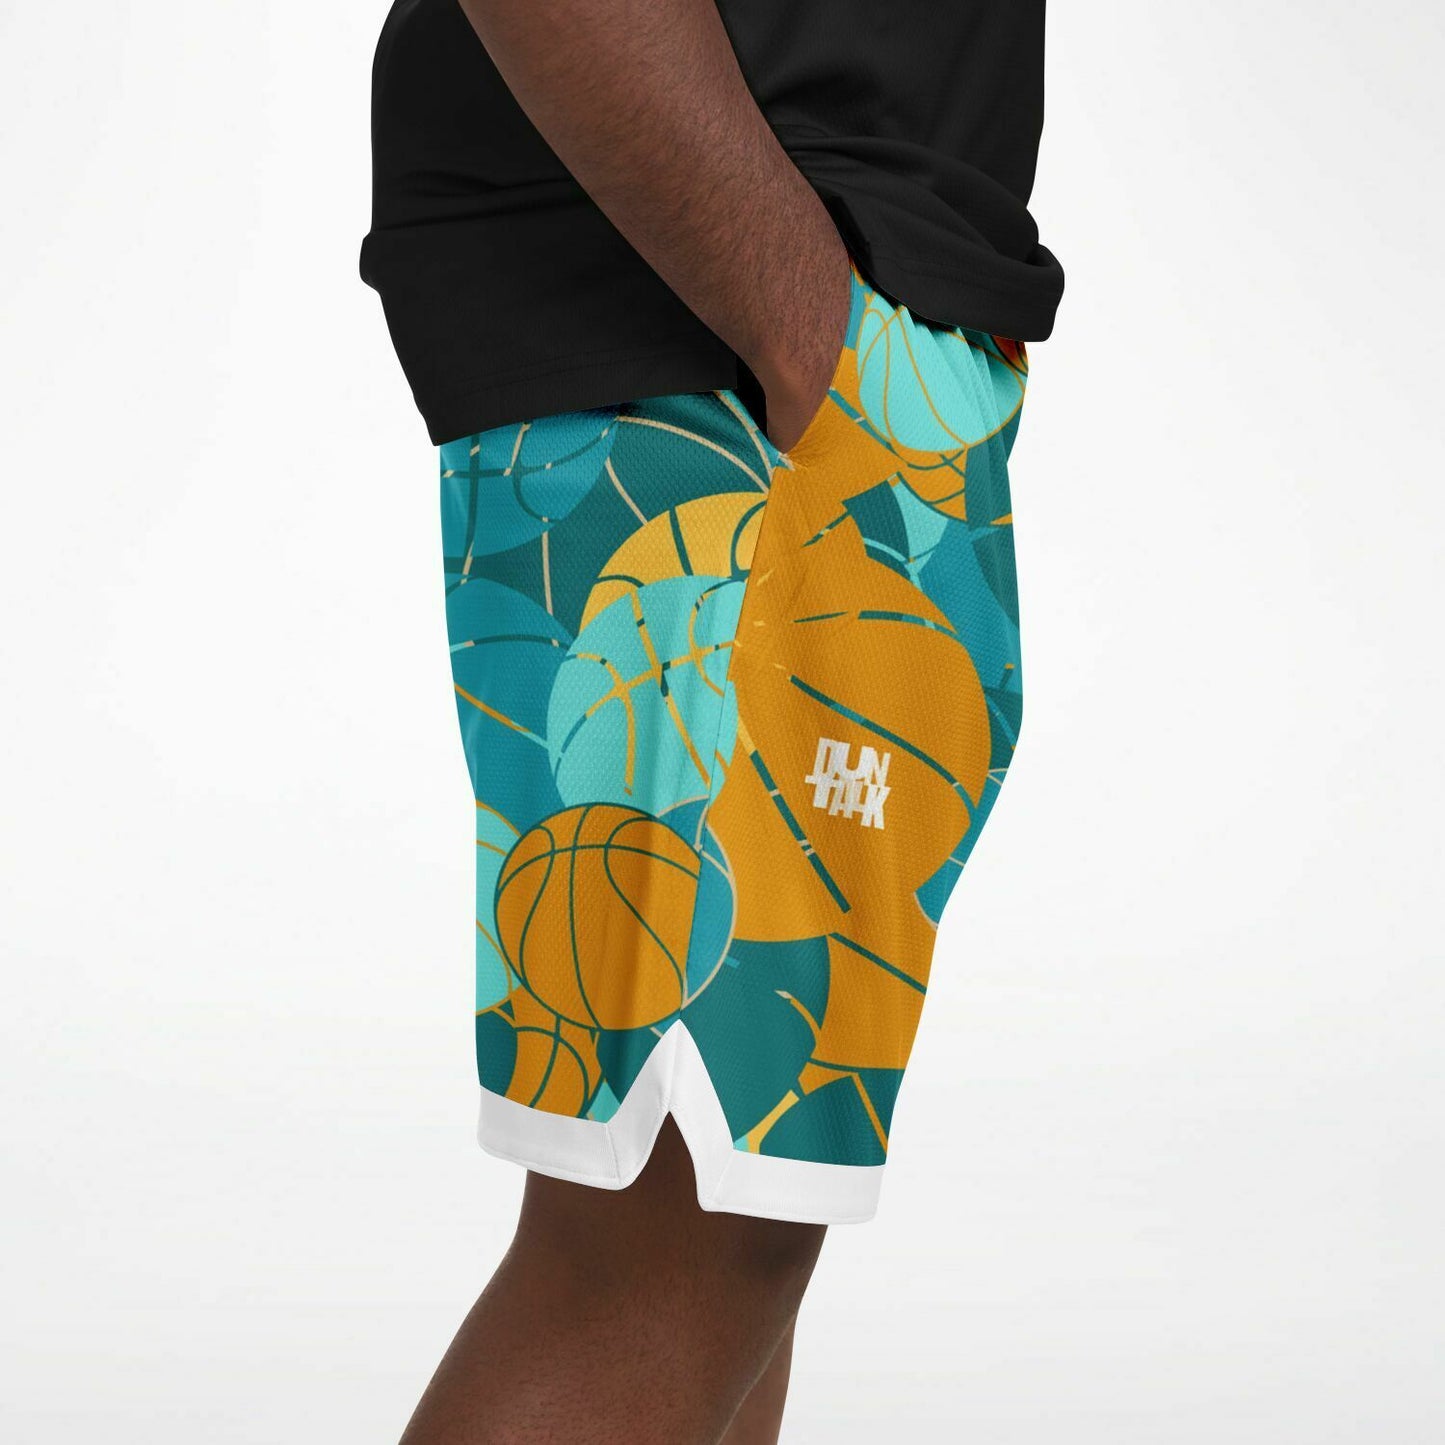 Duntalk "From The Logo" Classic Basketball Shorts